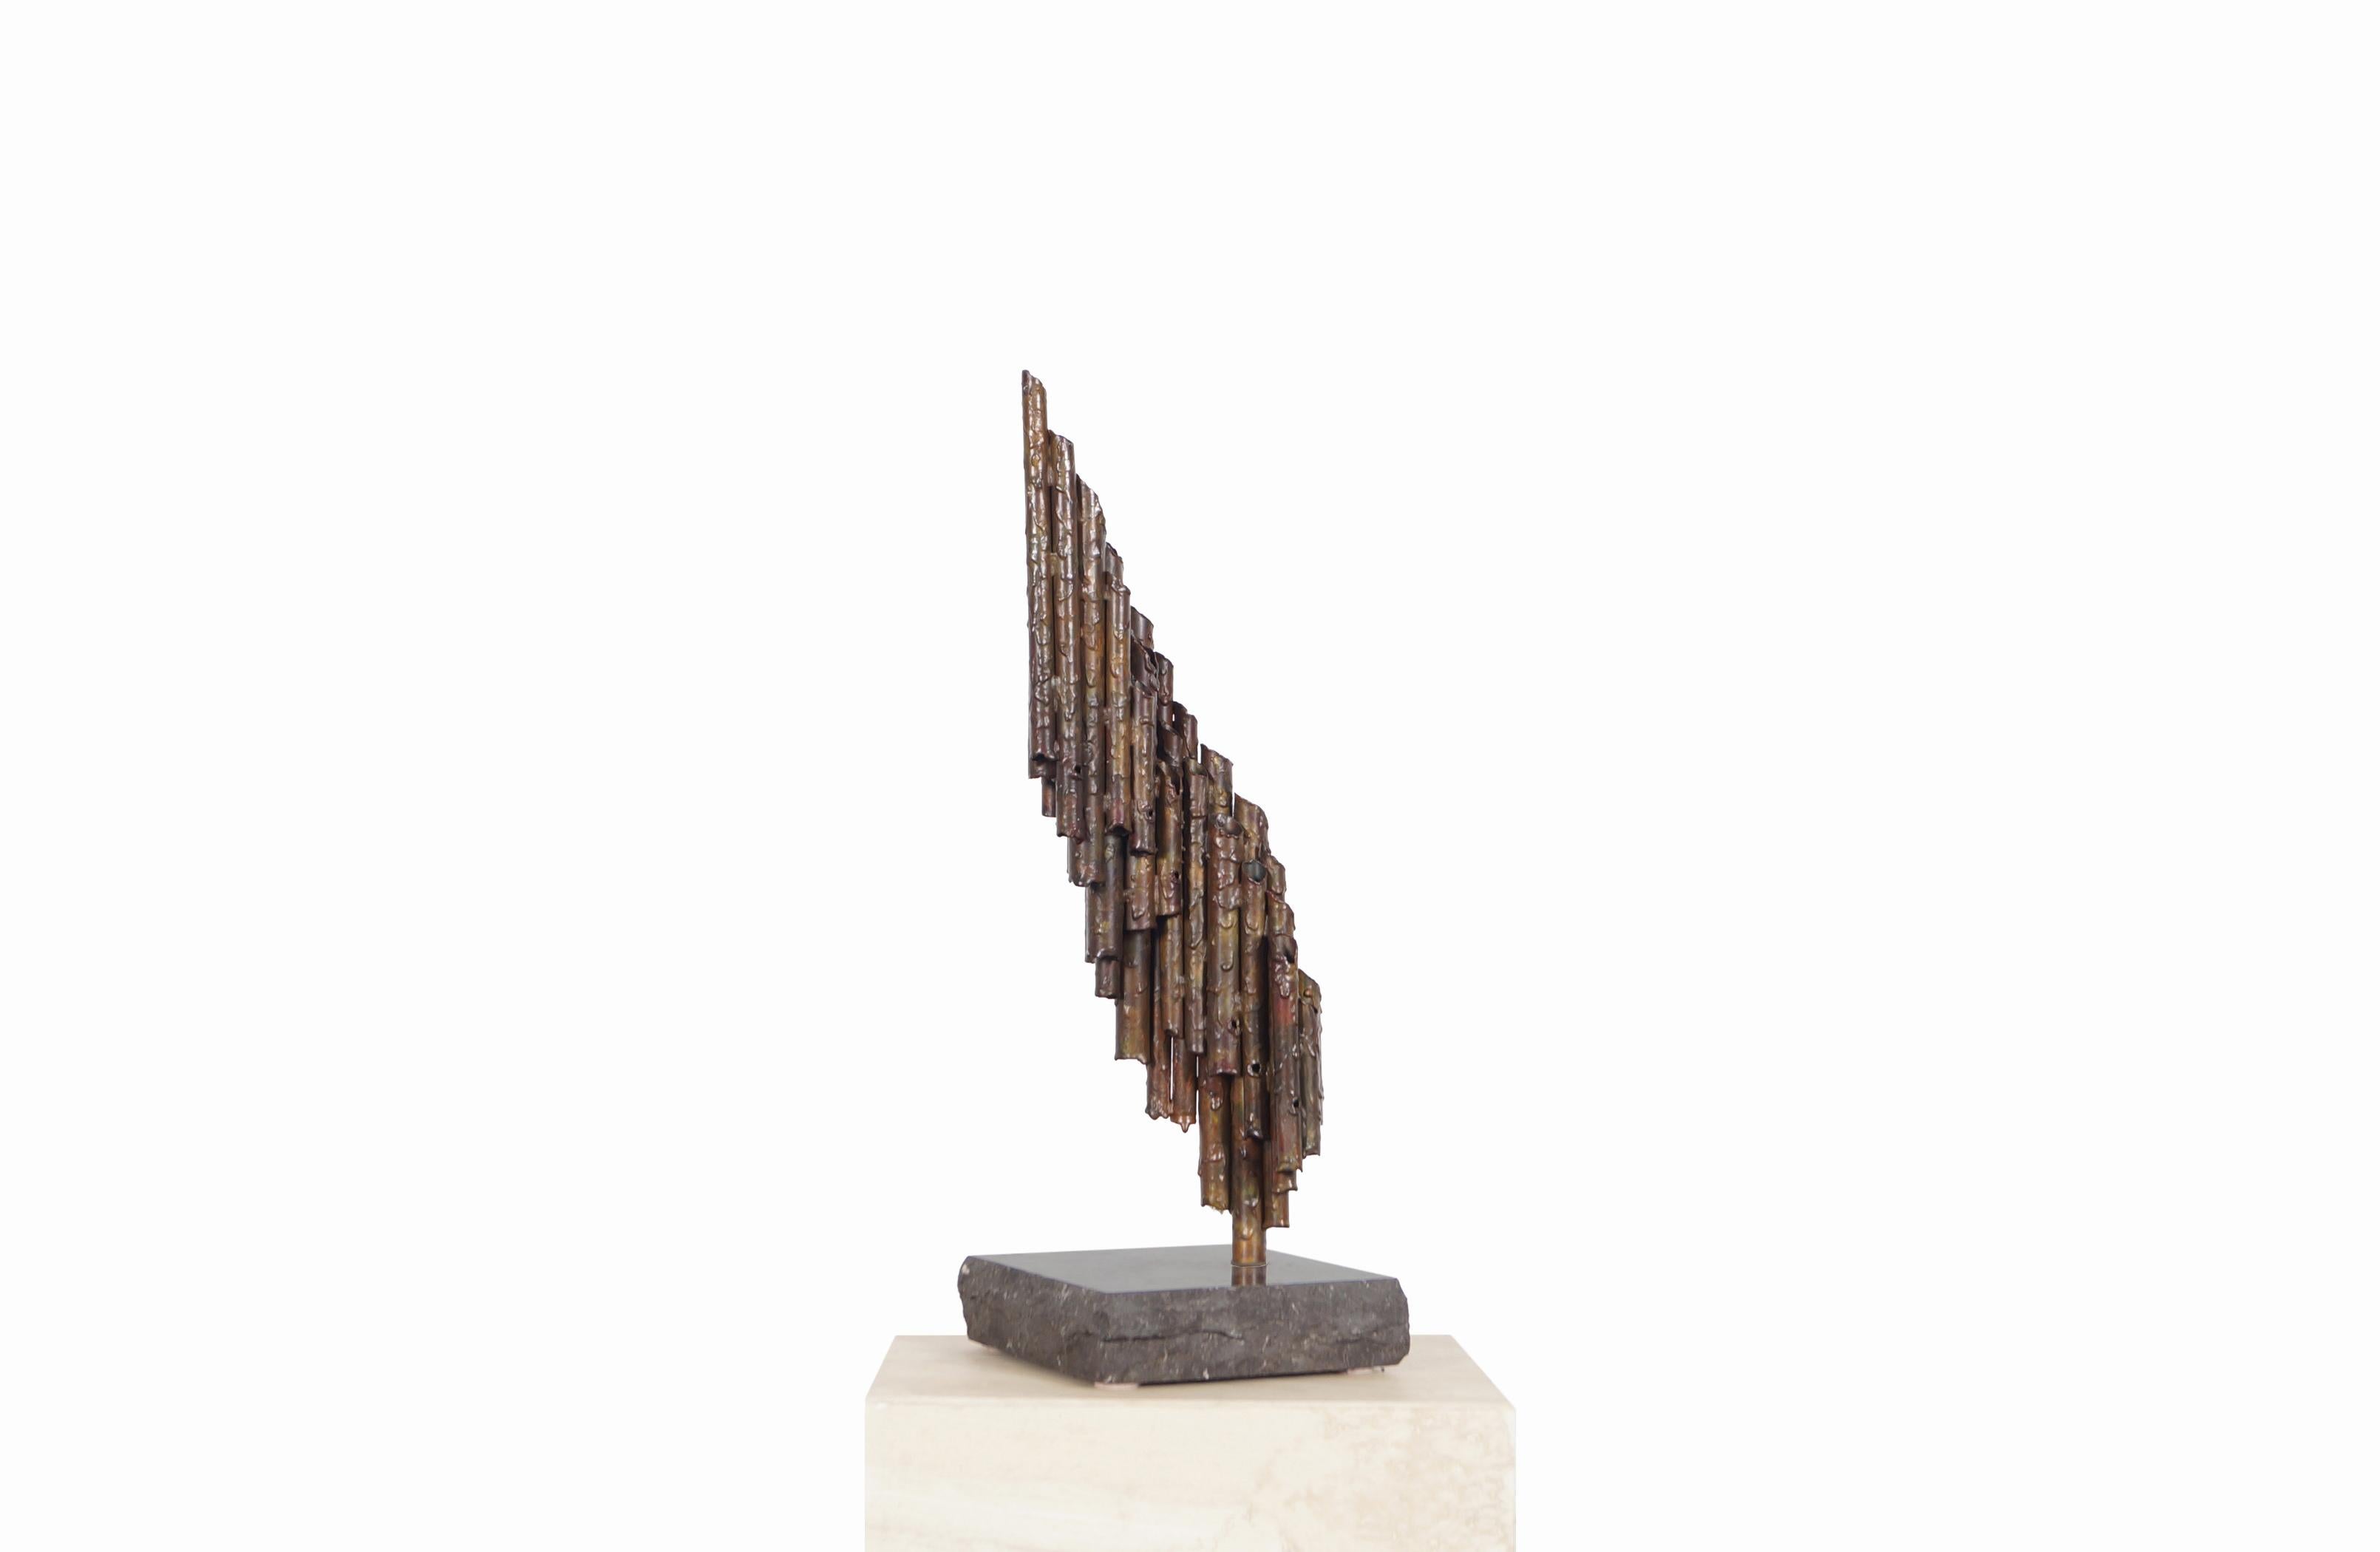 Exceptional vintage brutalist metal sculptured designed in United States, circa 1970s. This sculpture is made up of metal tubes that give the impression that the construction material in each tube is melting. Each tube is arranged in the shape of a